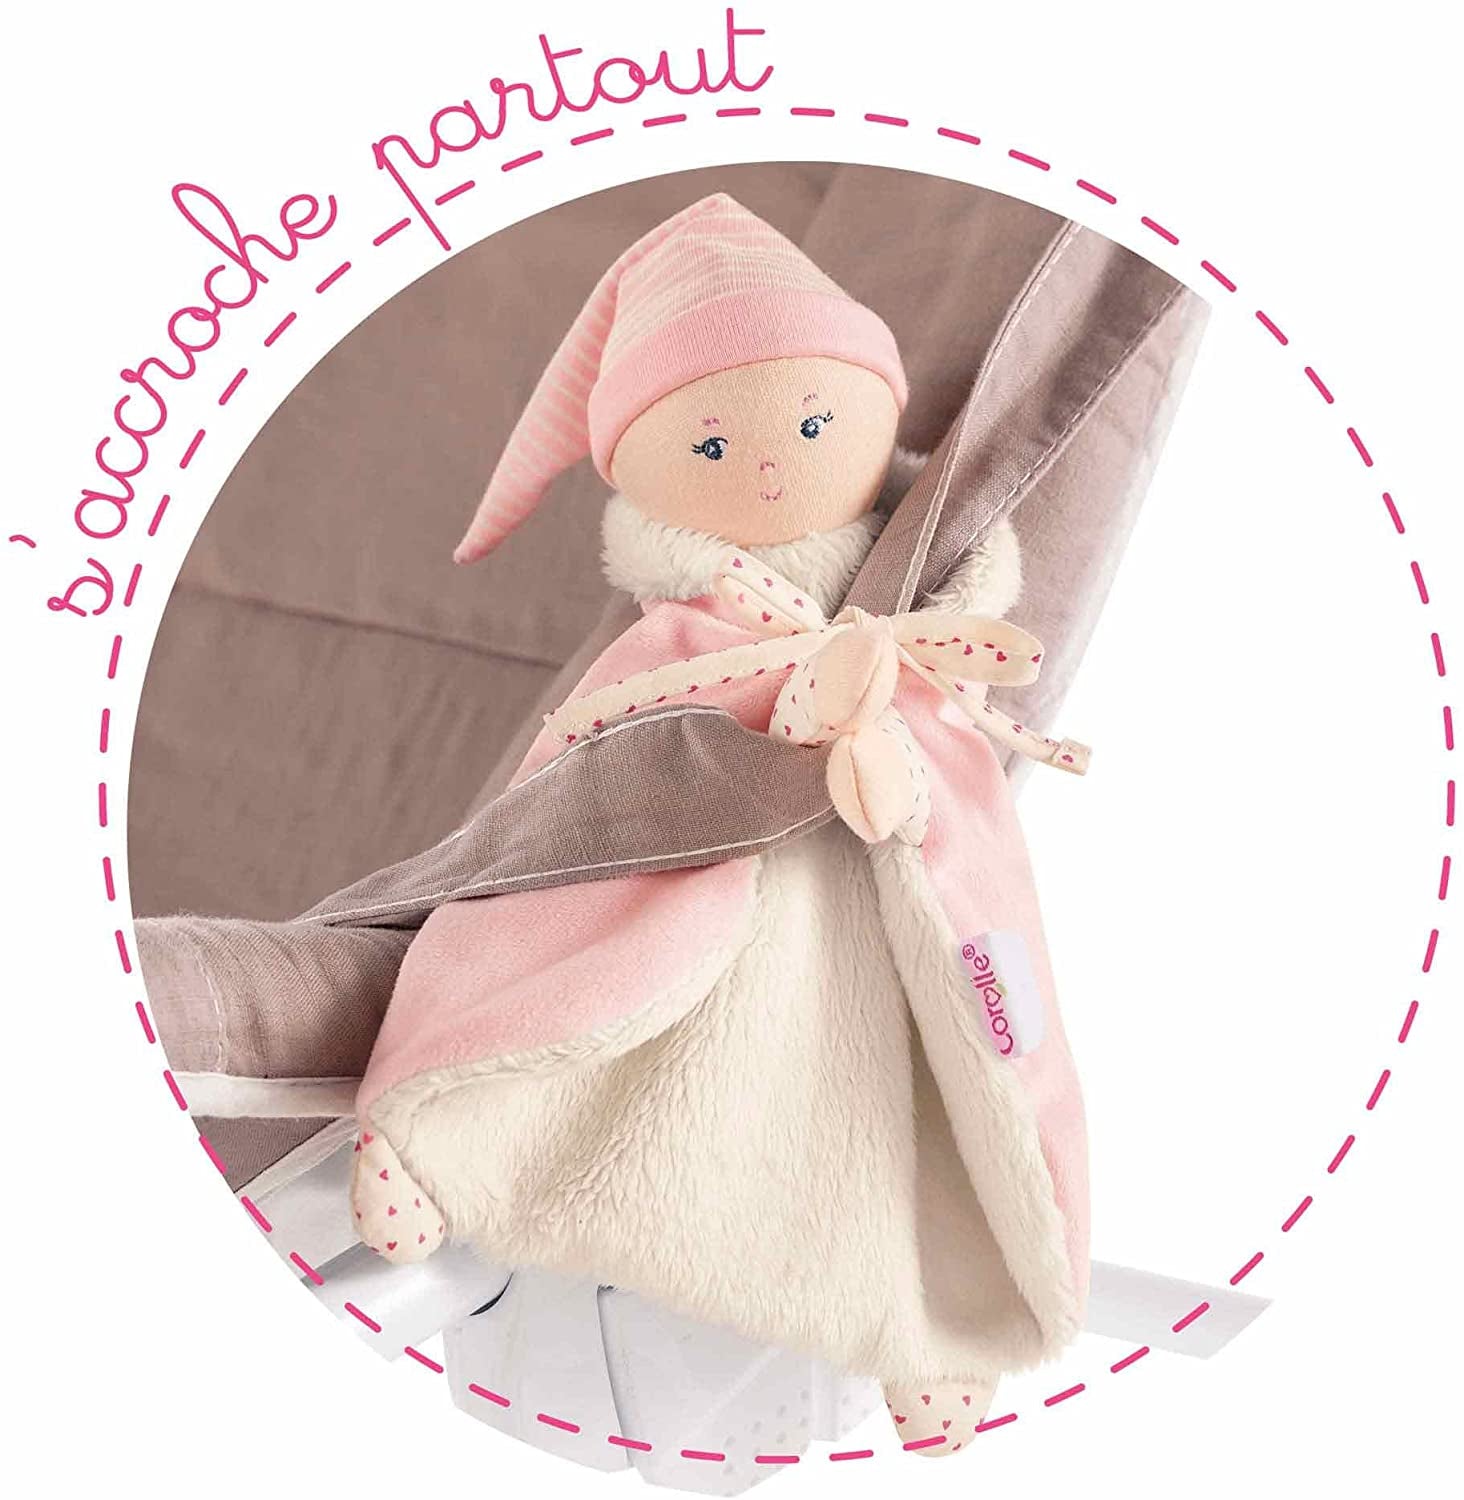 Cotton Flower Doudou Doll Corolle Comforters and Doudous